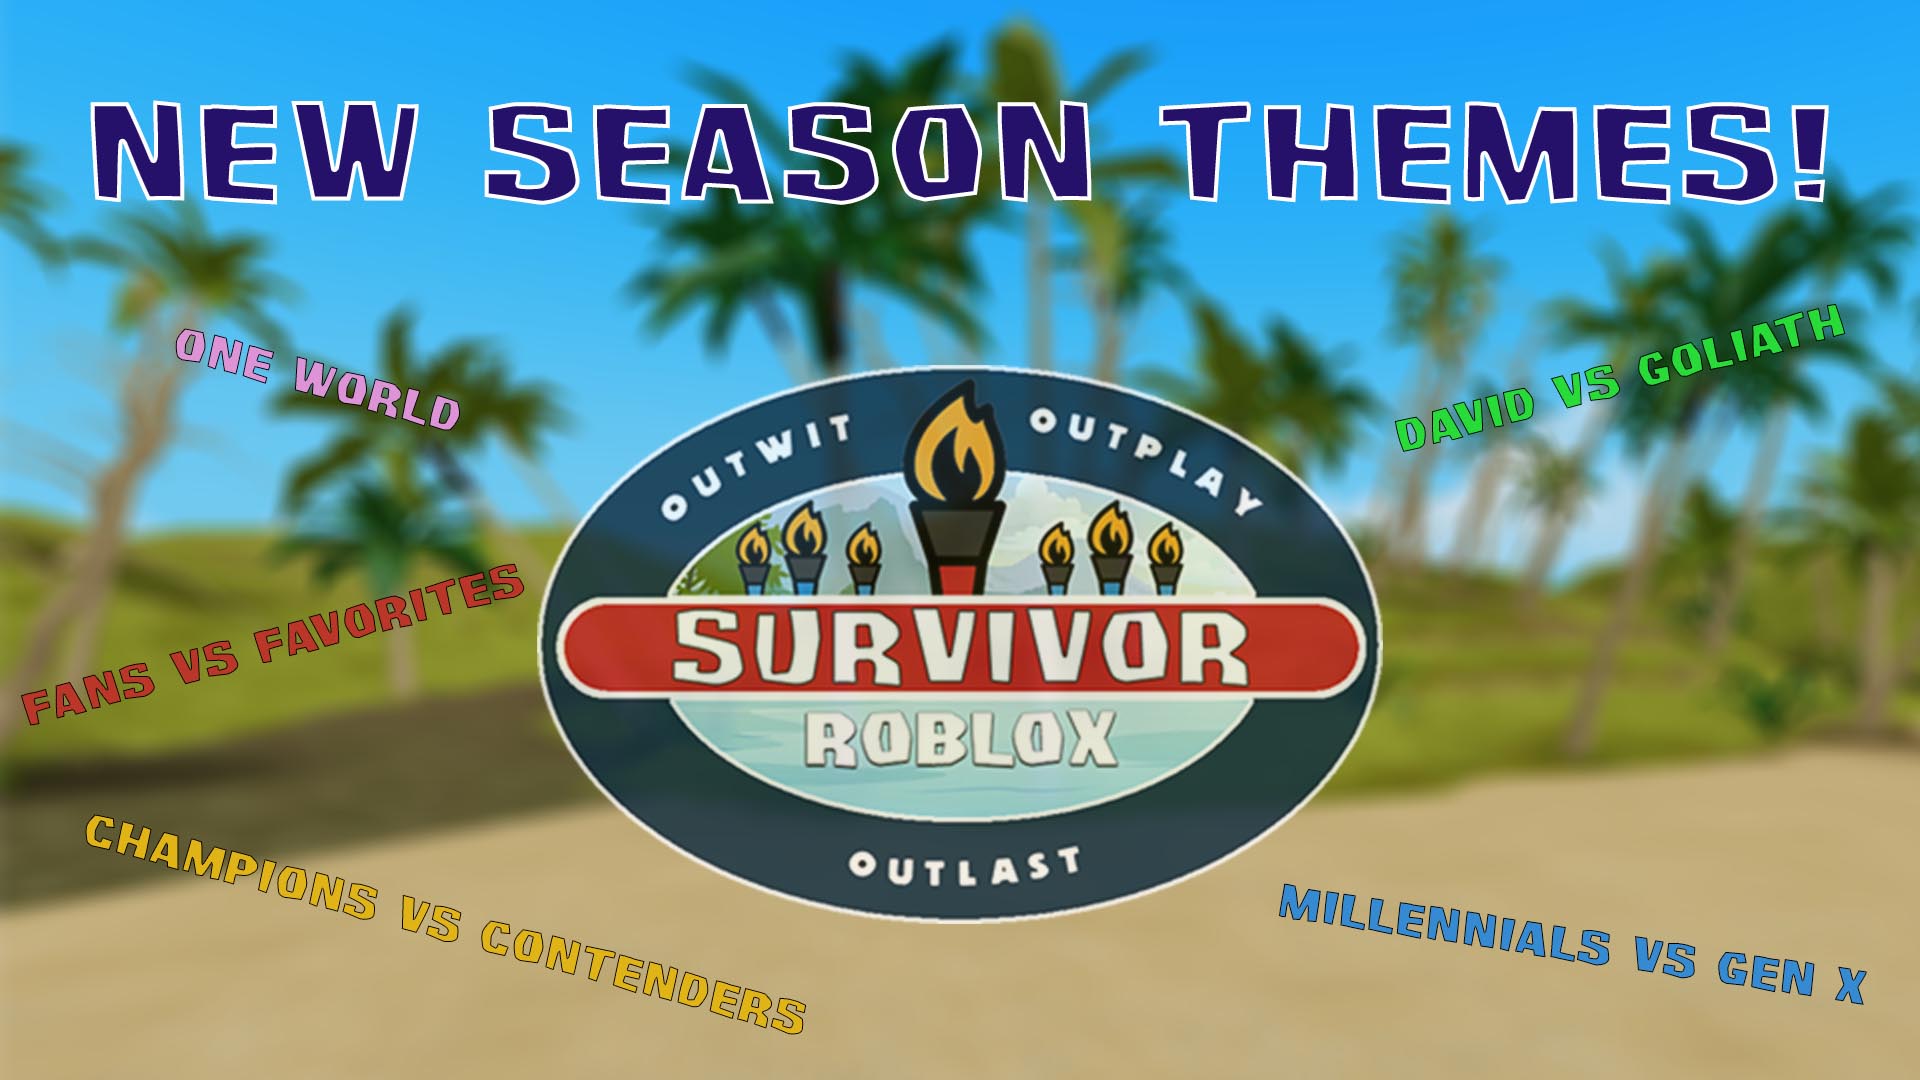 Jambe Games On Twitter Survivor Roblox S 1 Month Anniversary Today Plus We Reached Over 100k Visits What Does This Mean Well We Released Some Brand New Tribe Twists Season Themes Play Now On Roblox - roblox in real life survivor